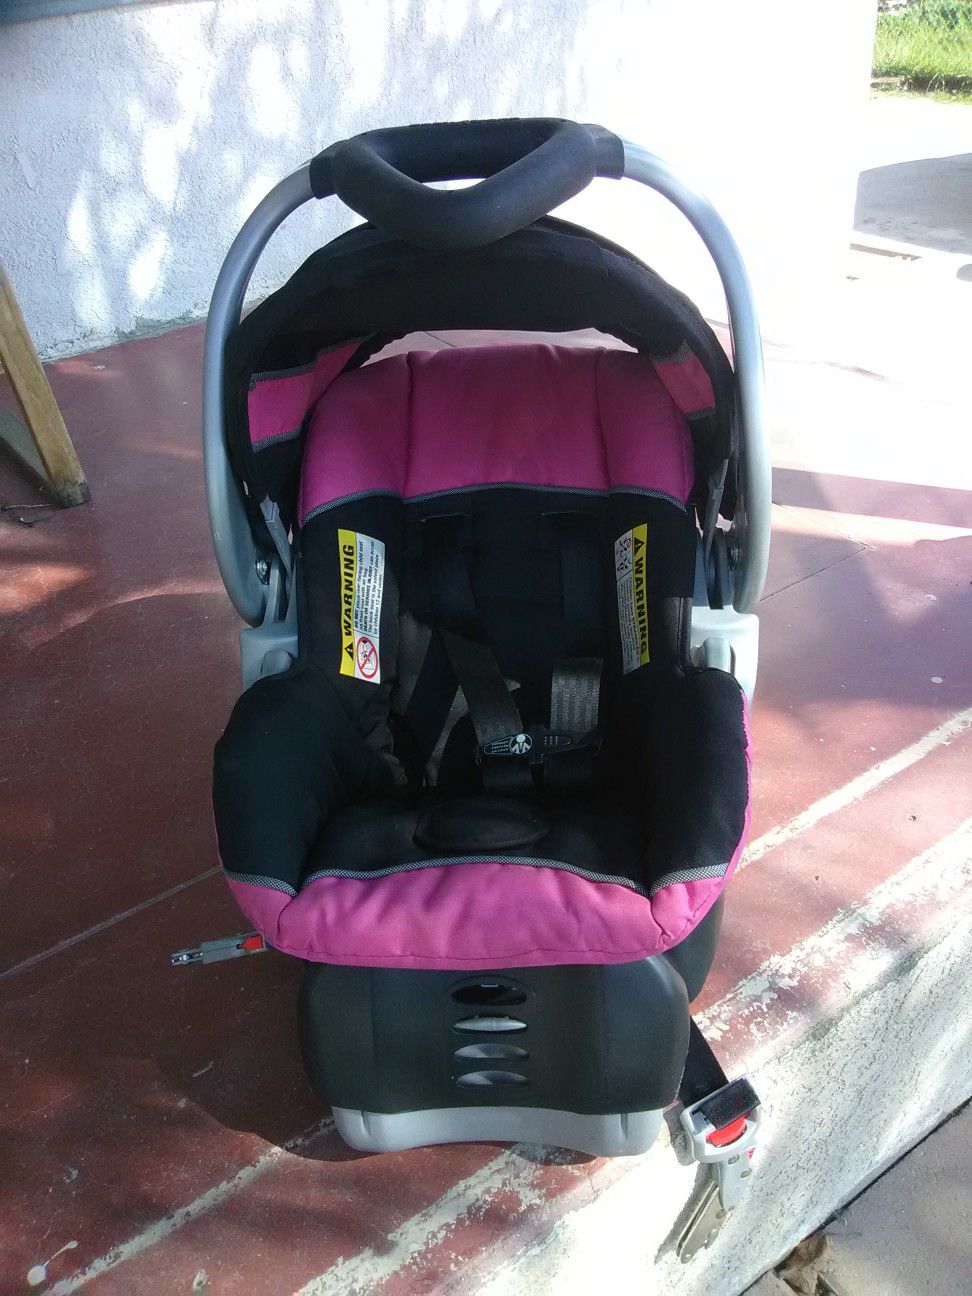 Car seat for infant.